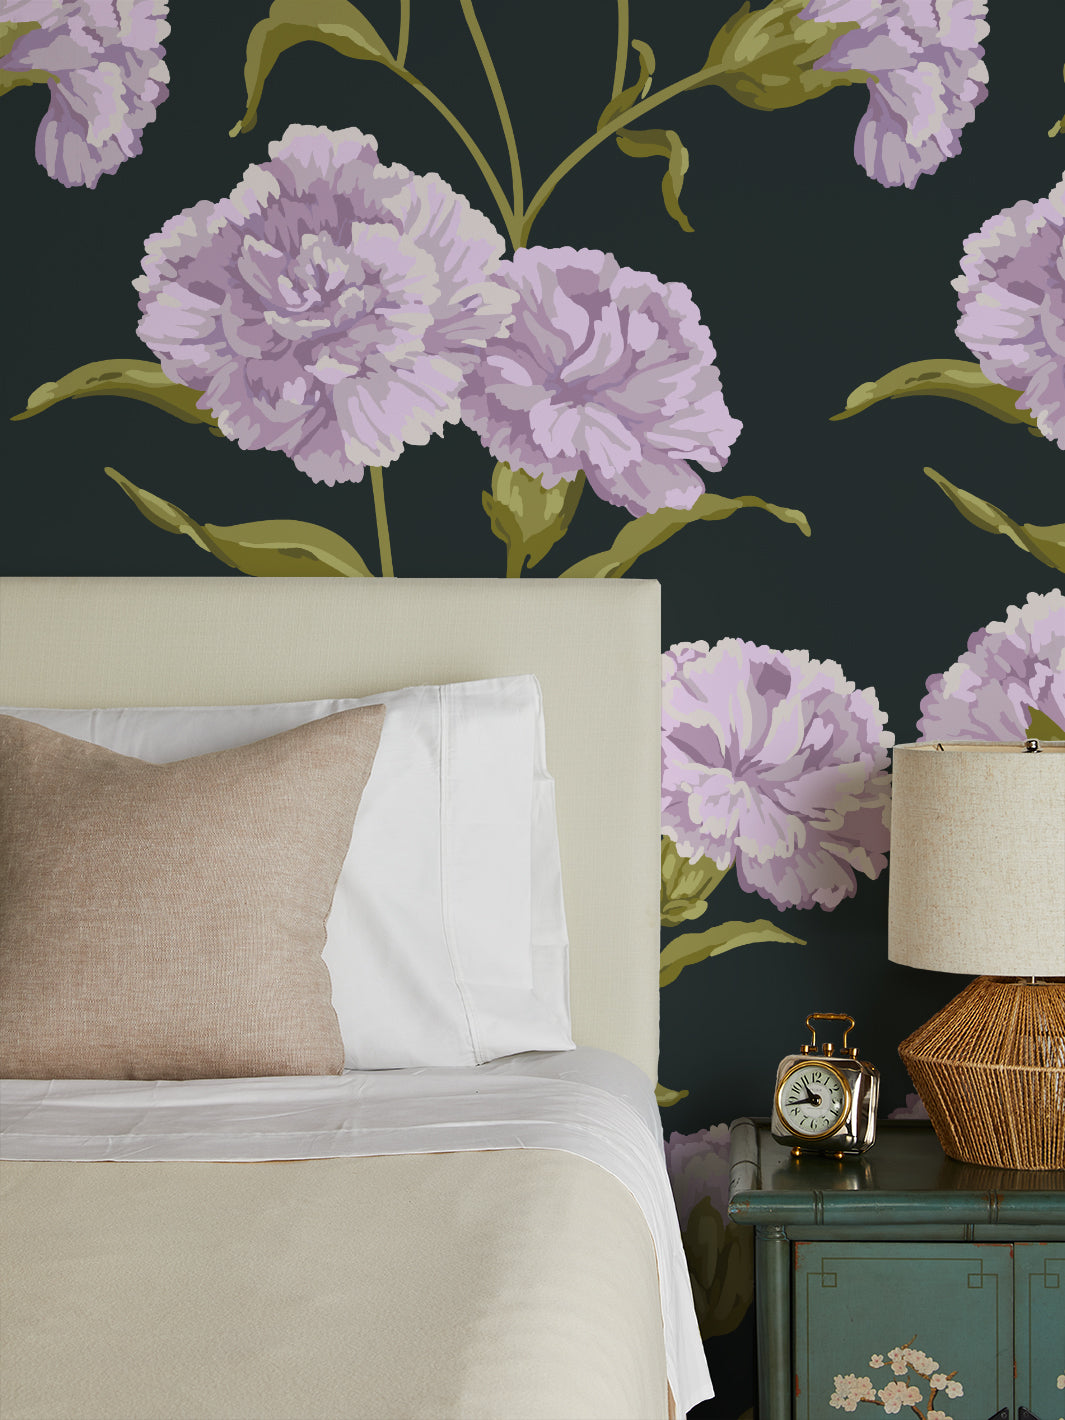 'Townhouse Mural' Wallpaper by Sarah Jessica Parker - Heliotrope on Charcoal